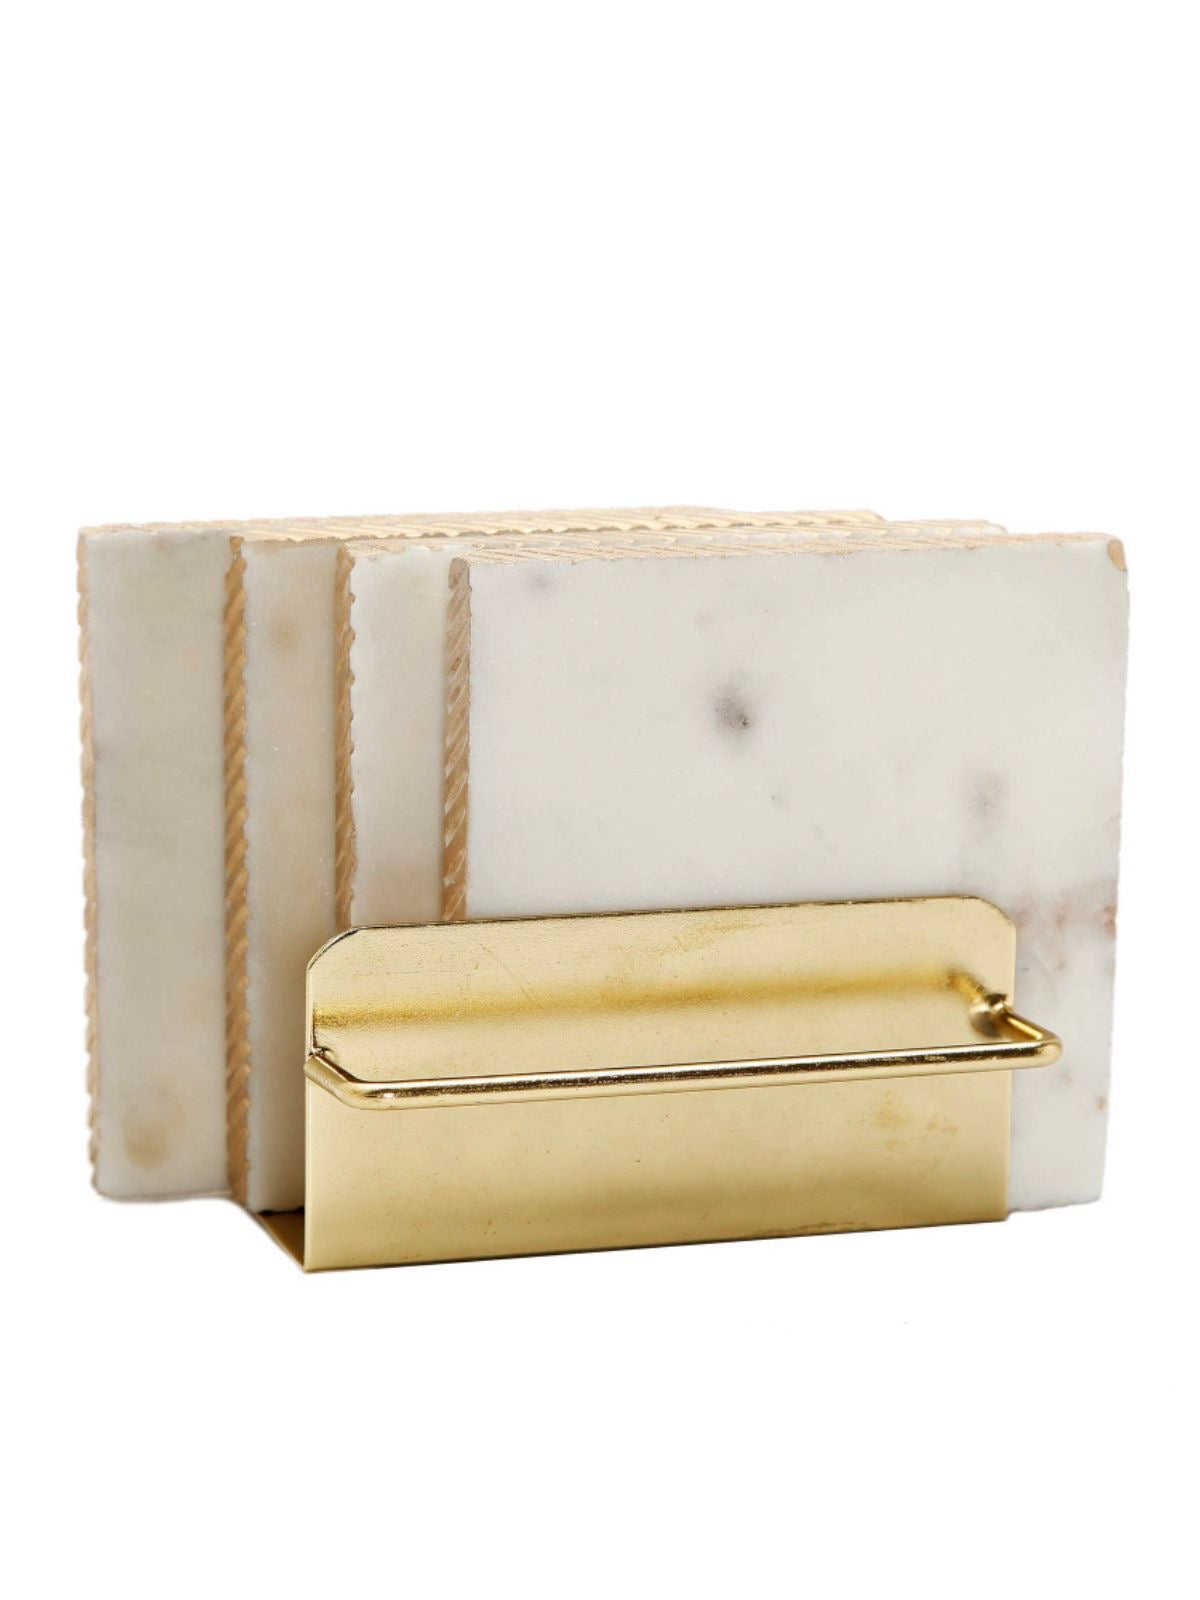 These 4 Inch Gold Edge Marble Coasters come with a beautiful Gold Metal Holder available at KYA Home Decor